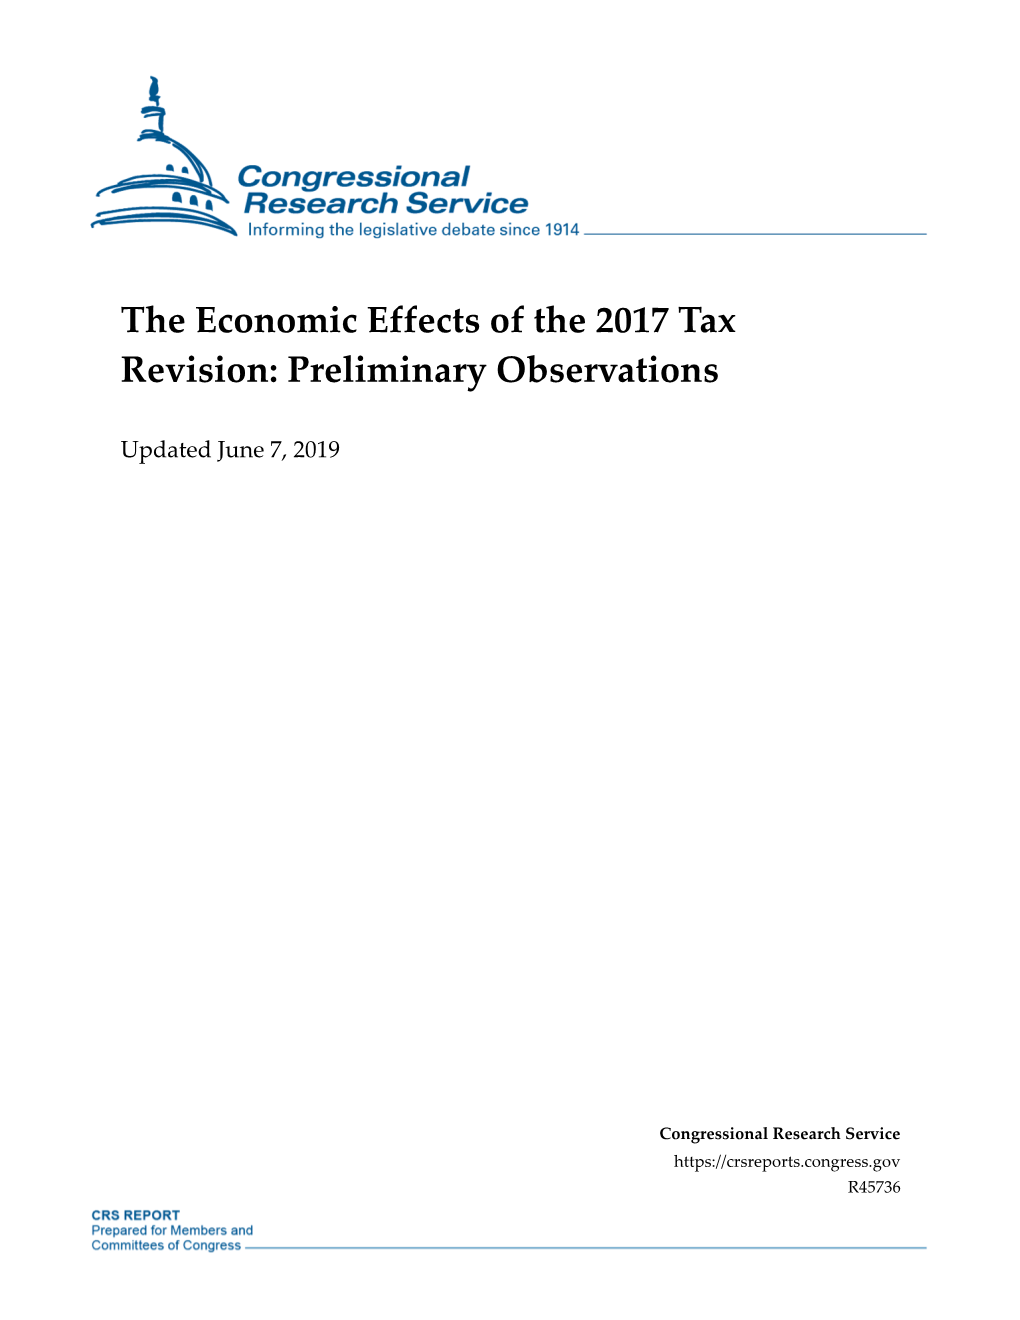 The Economic Effects of the 2017 Tax Revision: Preliminary Observations